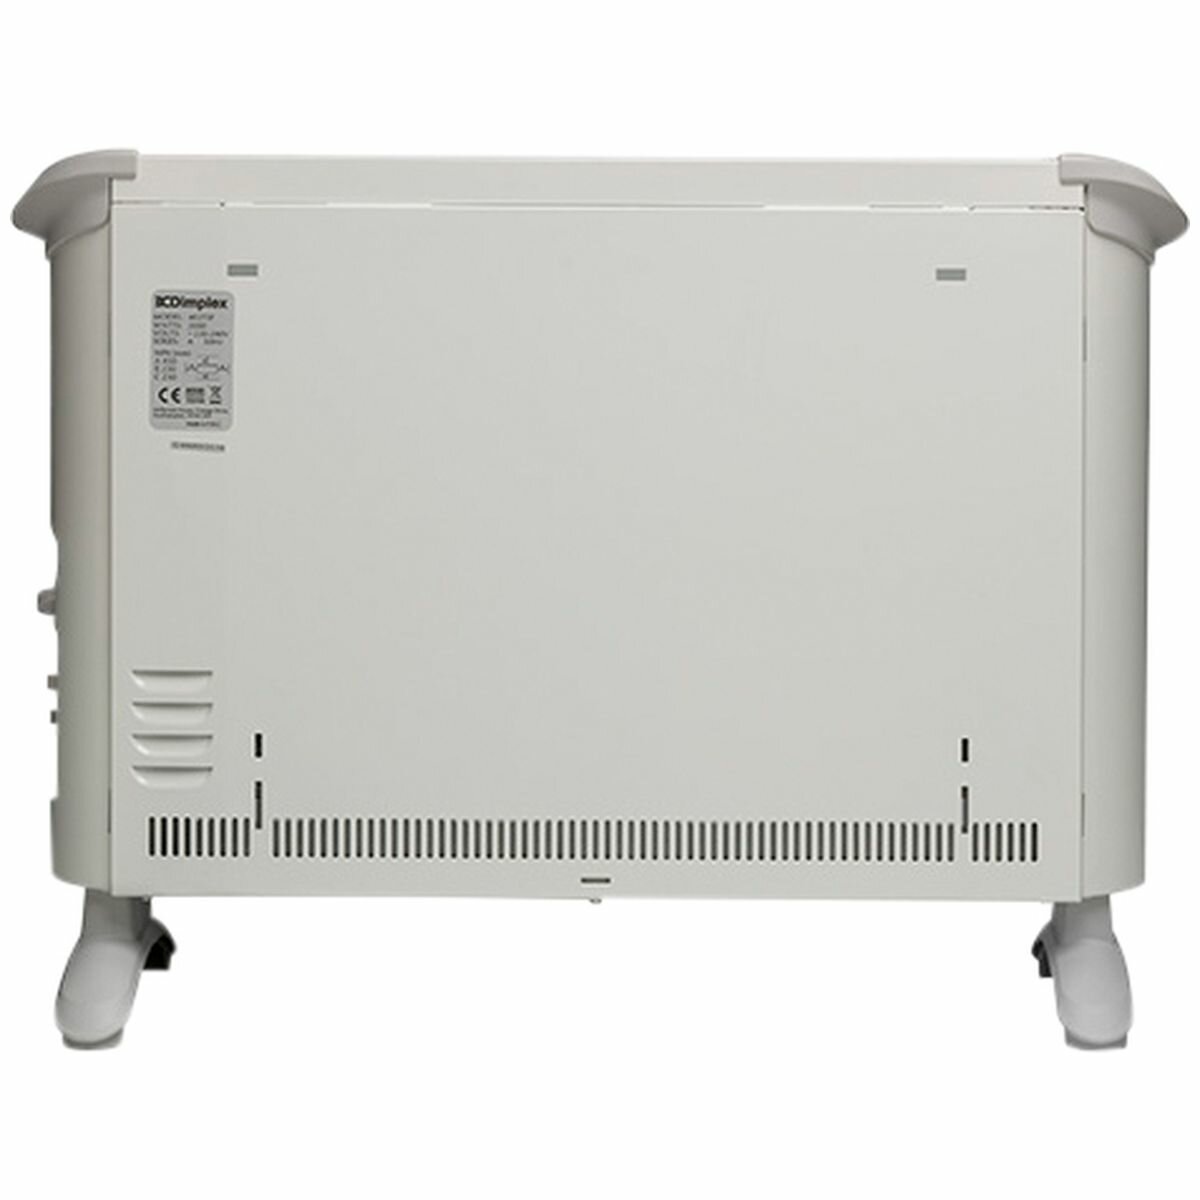 Dimplex 2 KW Convector Heater with Turbo Fan